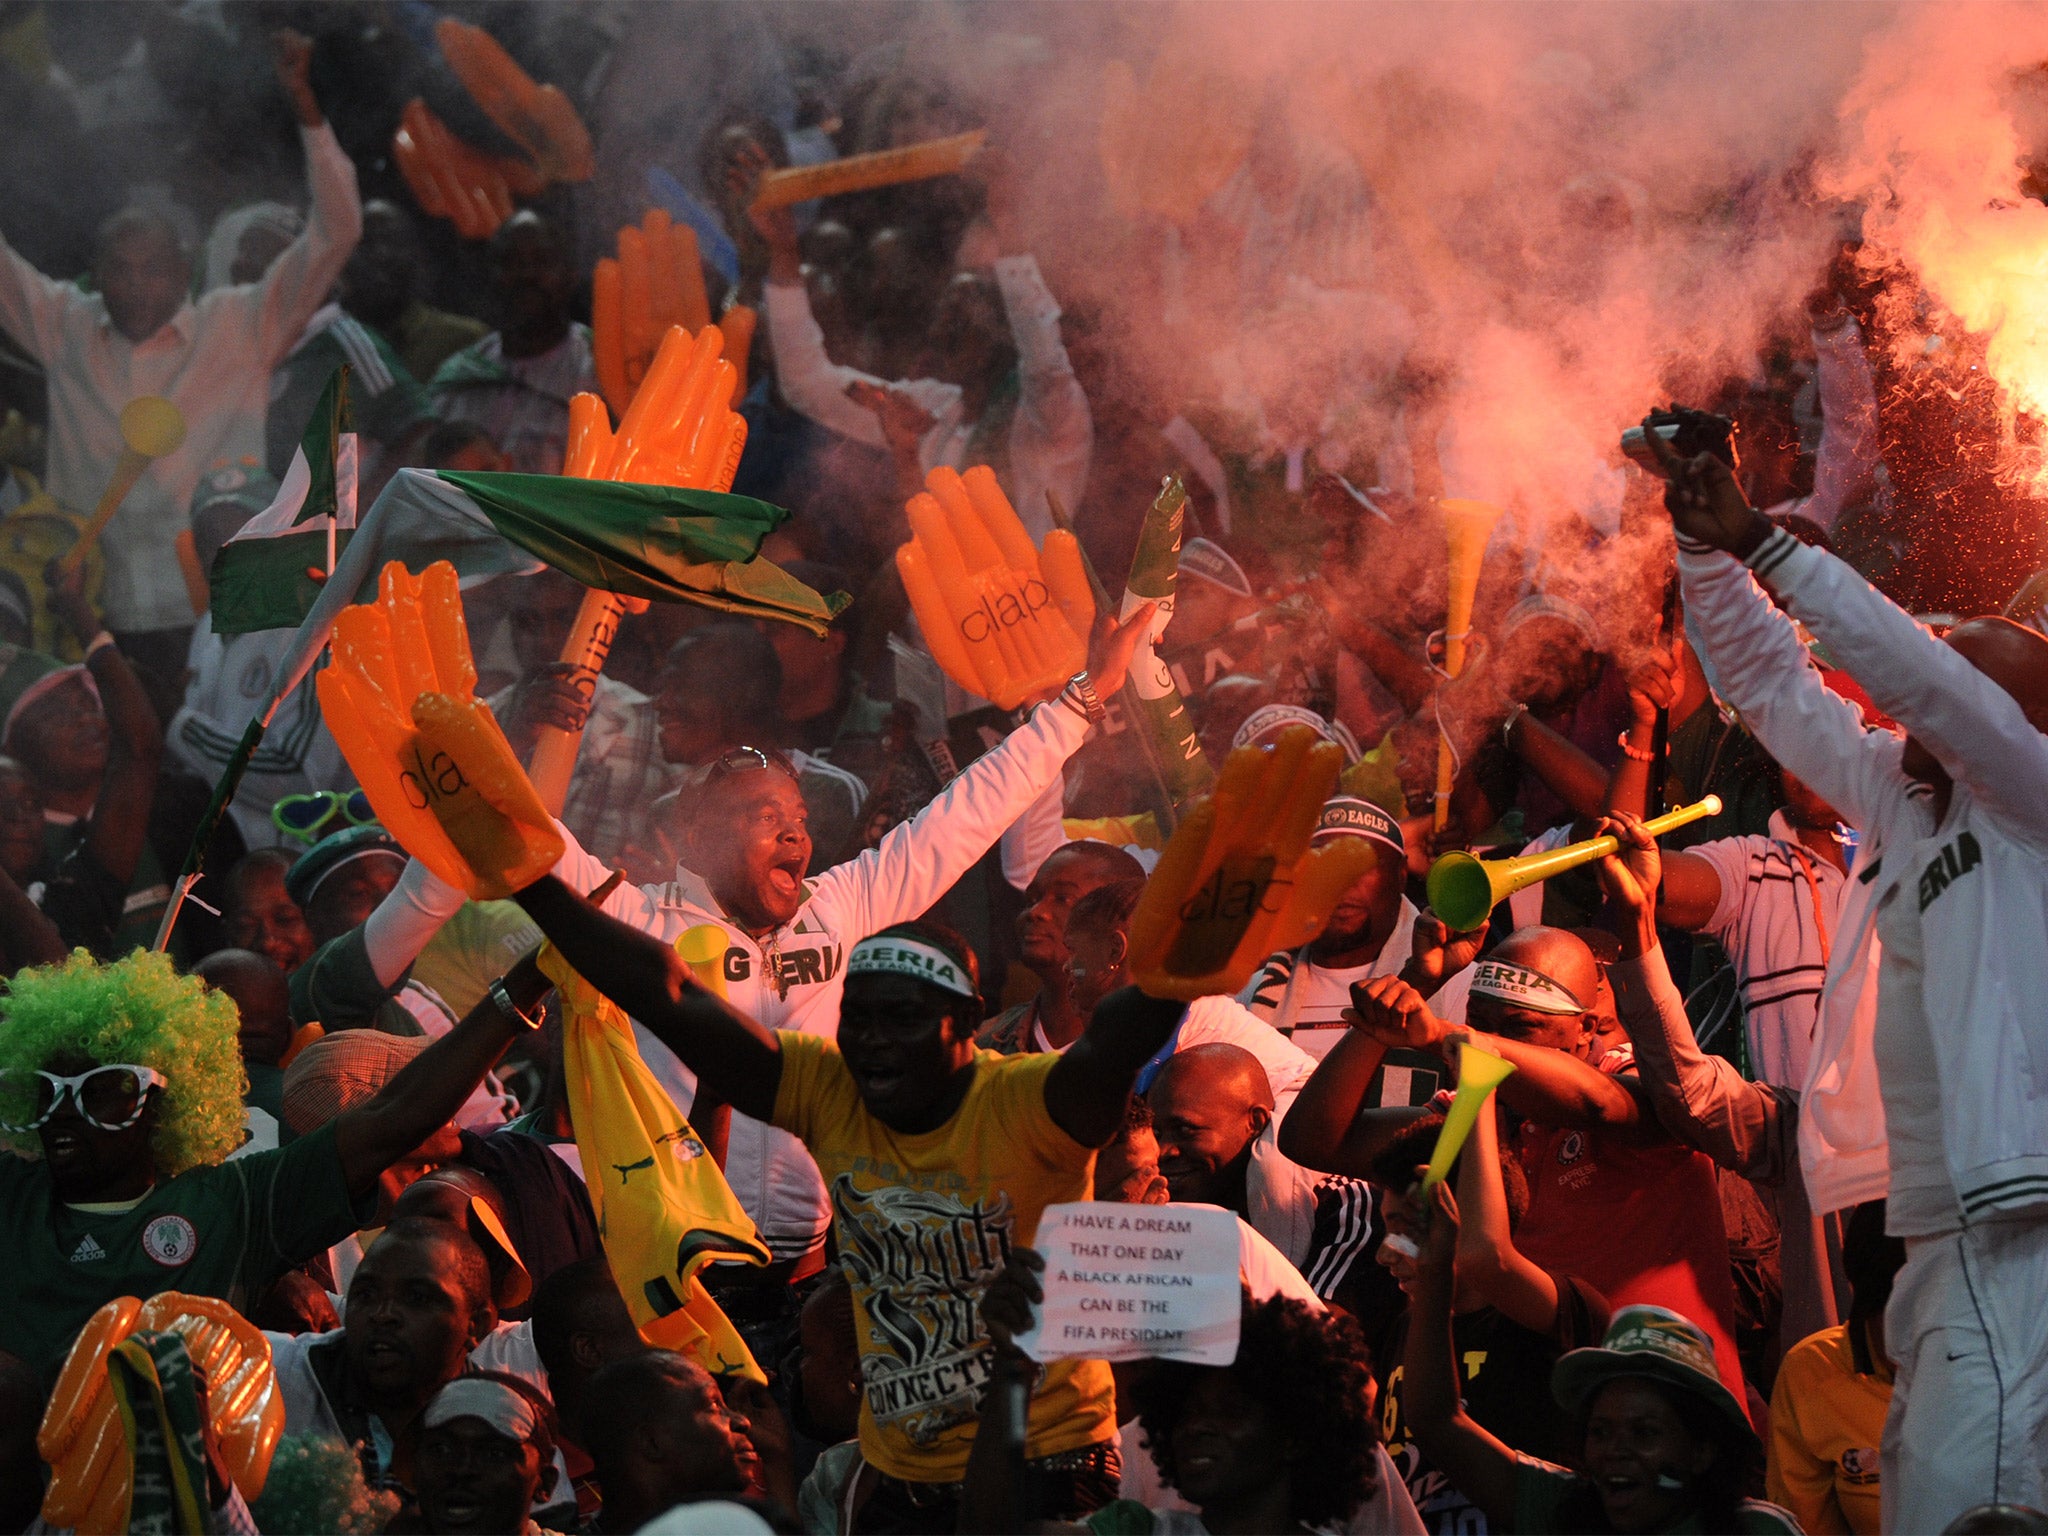 Nigerian football fans show their passion by setting off flares and blowing vuvuzelas